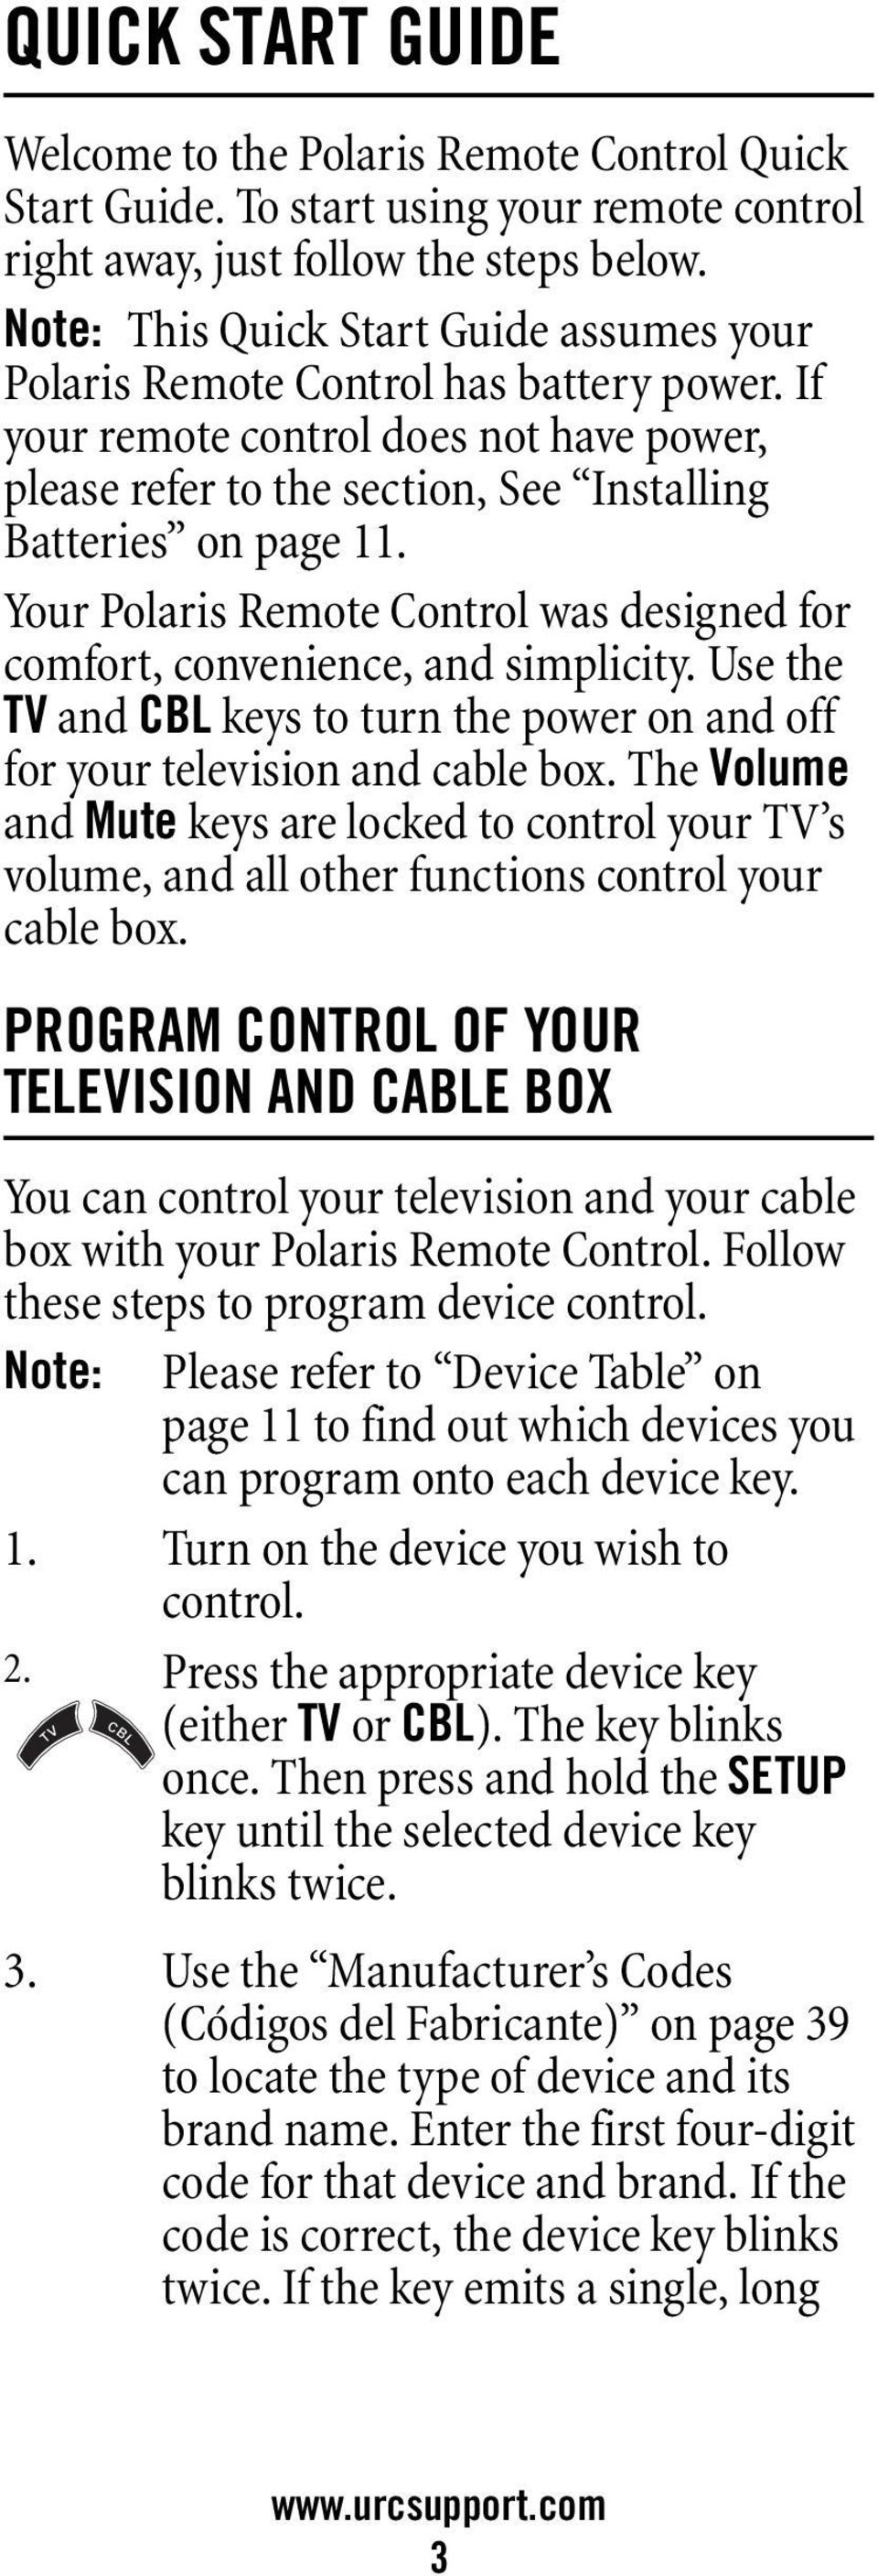 Your Polaris Remote Control was designed for comfort, convenience, and simplicity. Use the TV and CBL keys to turn the power on and off for your television and cable box.